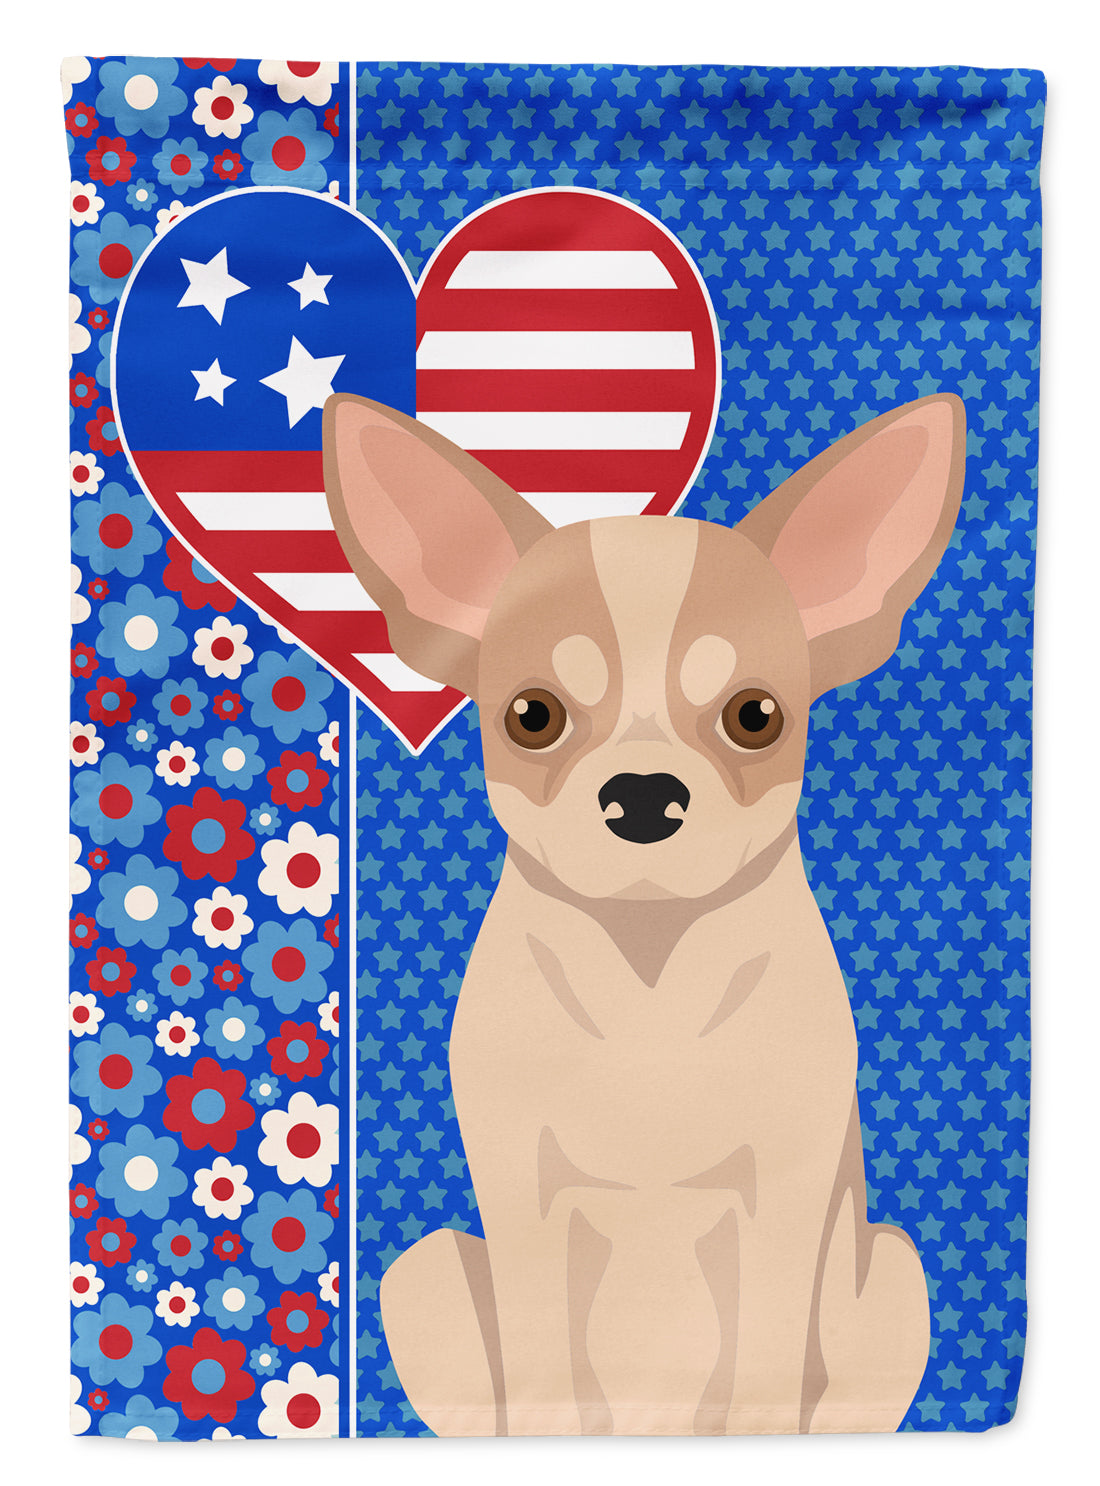 Fawn and White Chihuahua USA American Flag Garden Size